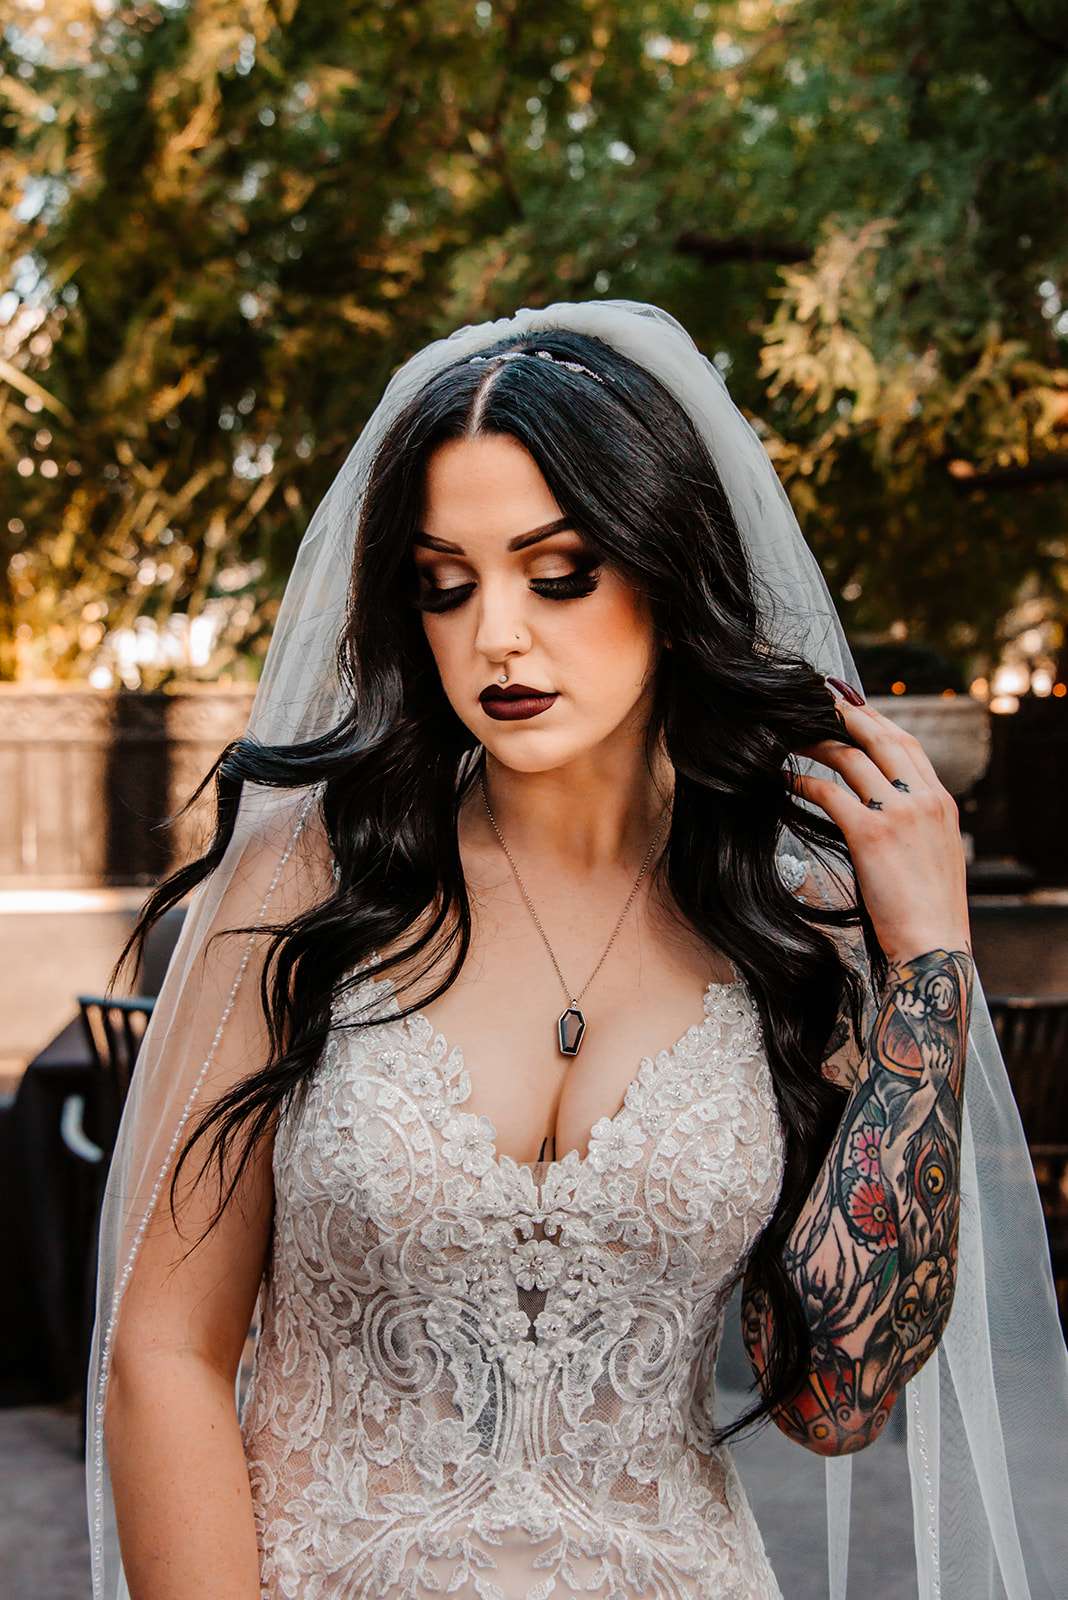 Gothic Vegas Wedding With Some Traditional Elements · Rock N Roll Bride 